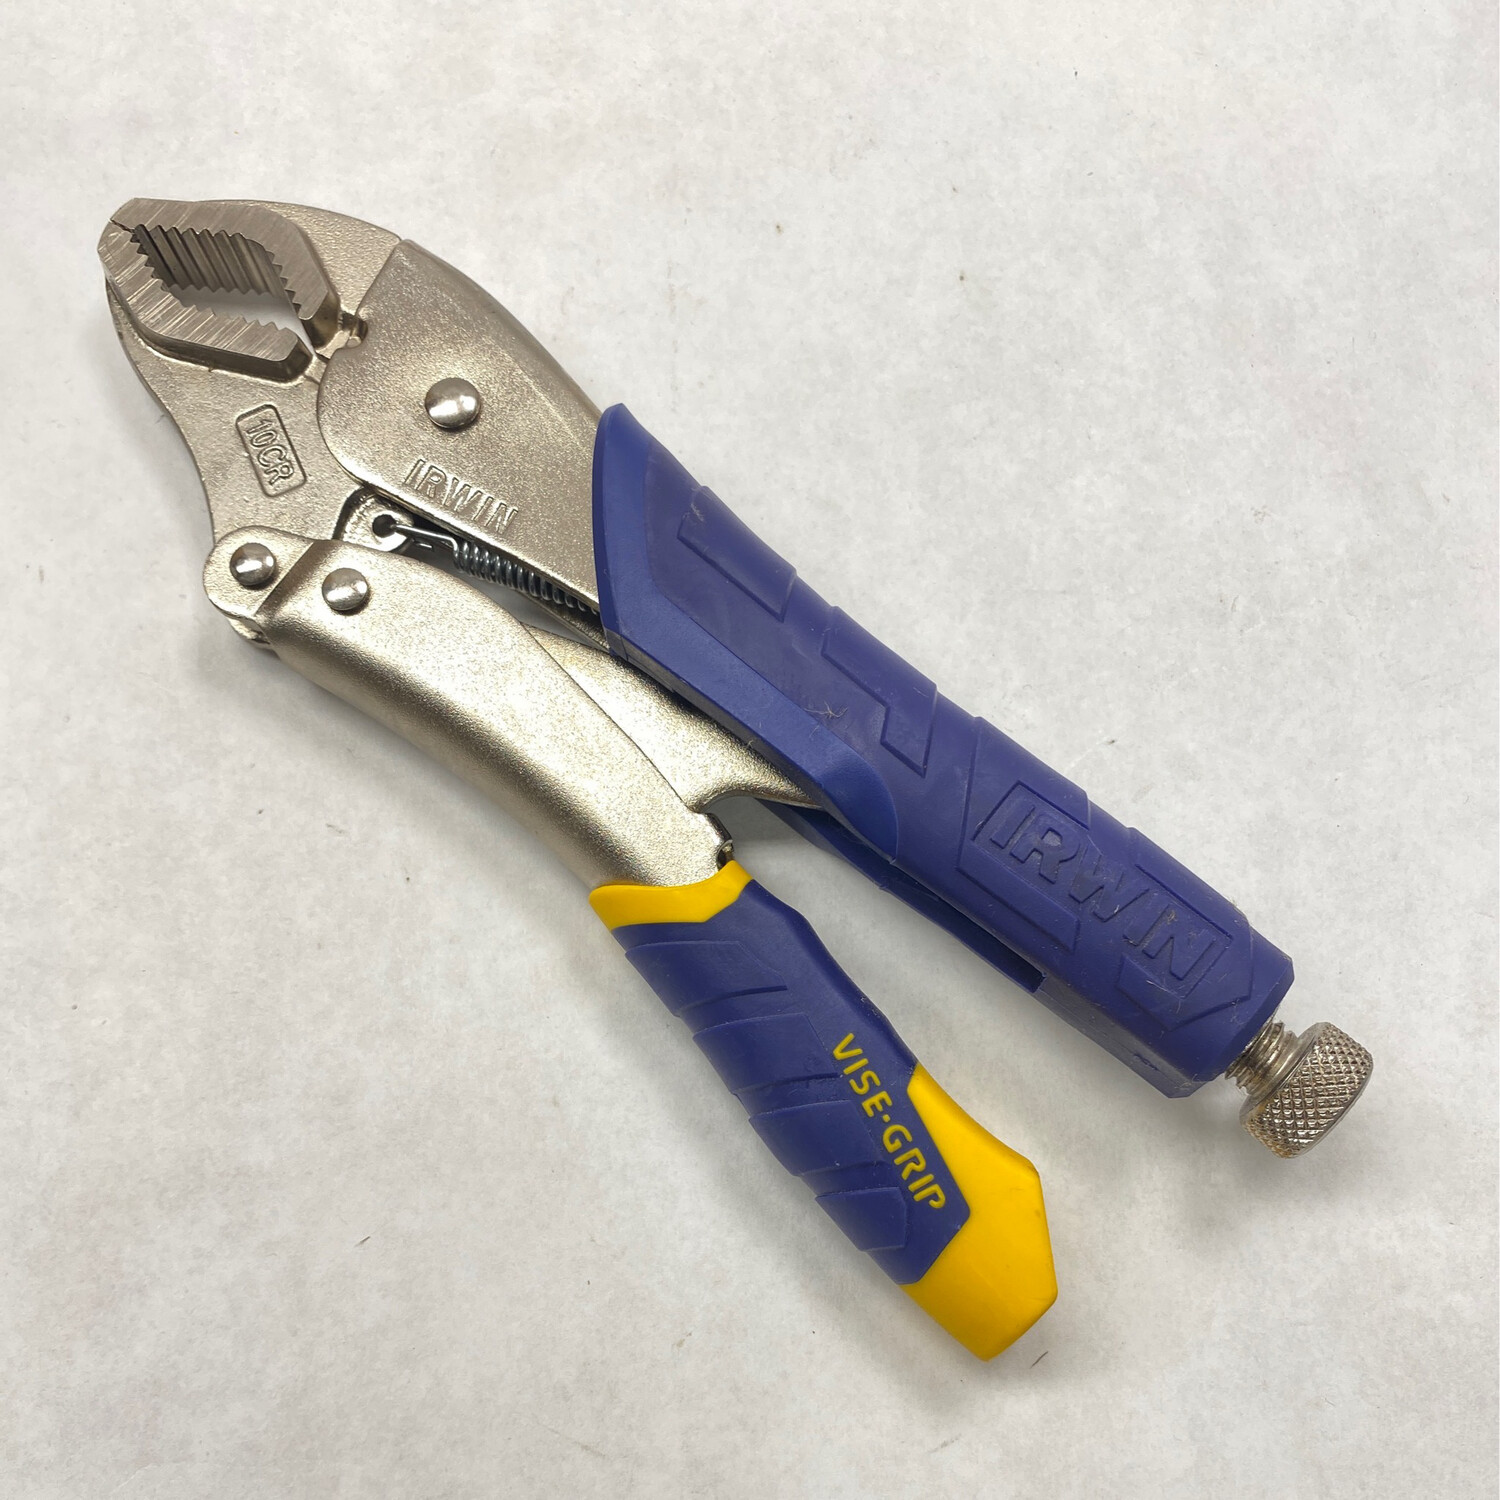 Irwin Vise Grip 10” Curved Jaw Locking Pliers, 10CR